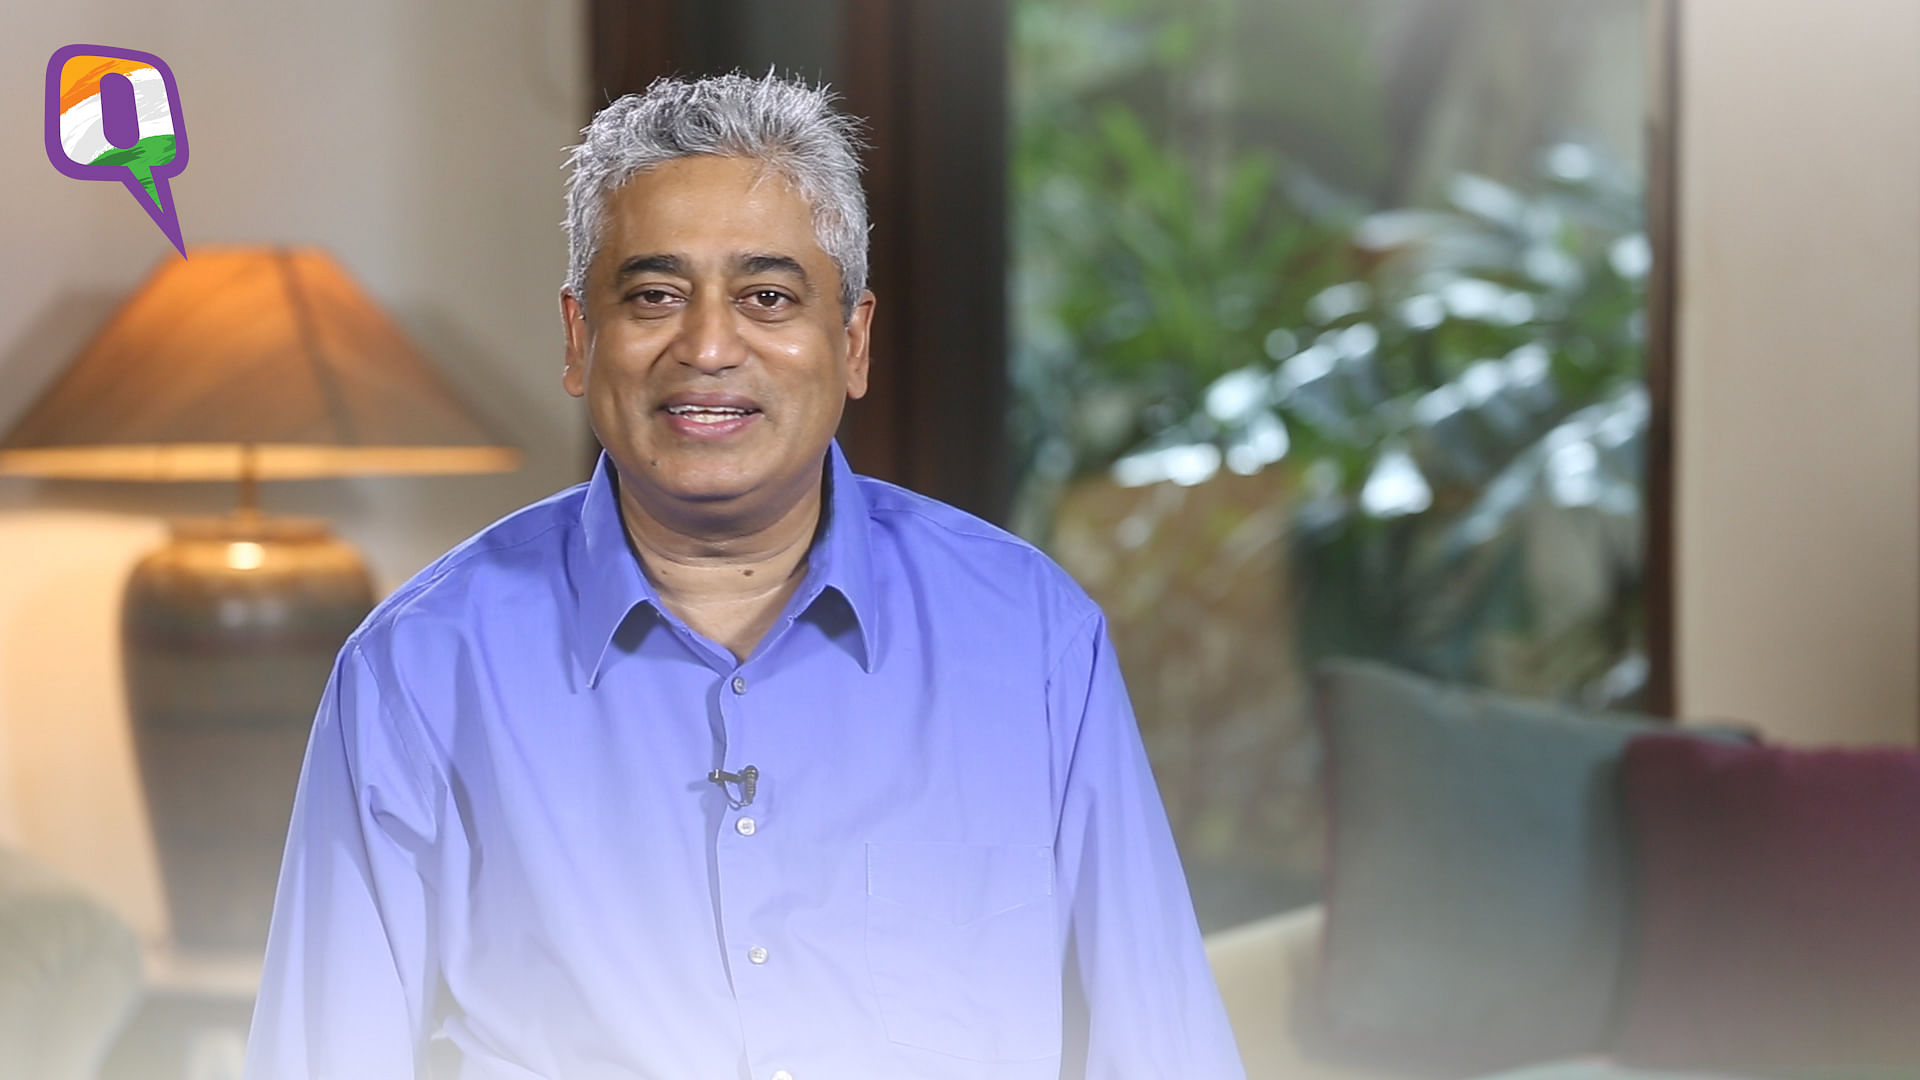 “There’s something about Bombay to Goa that is just lovely”, says Rajdeep Sardesai